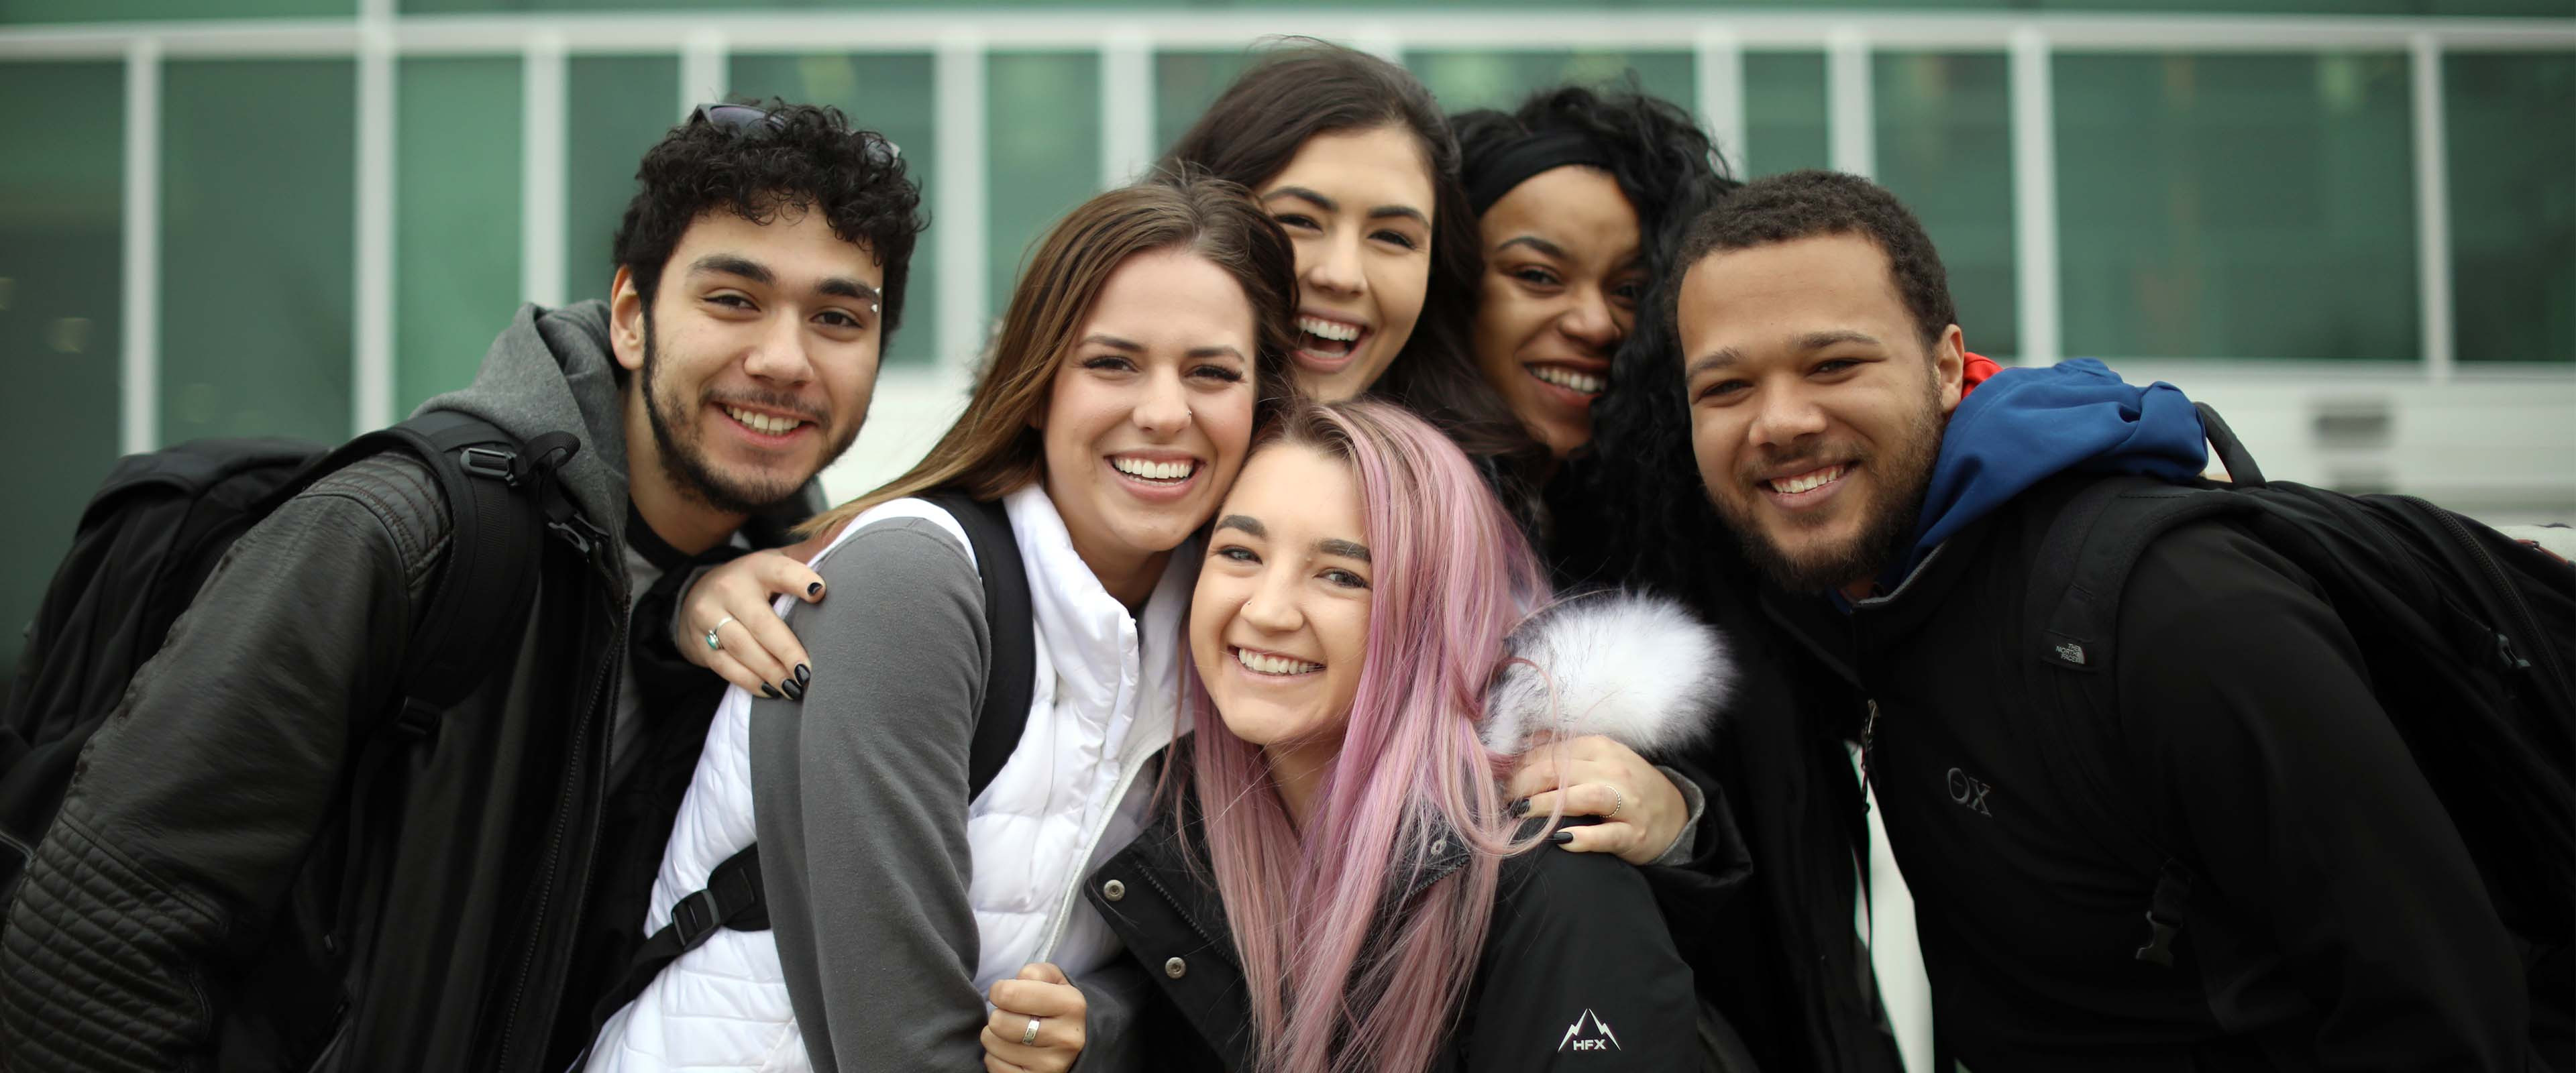 A group of students smiling together on campus.